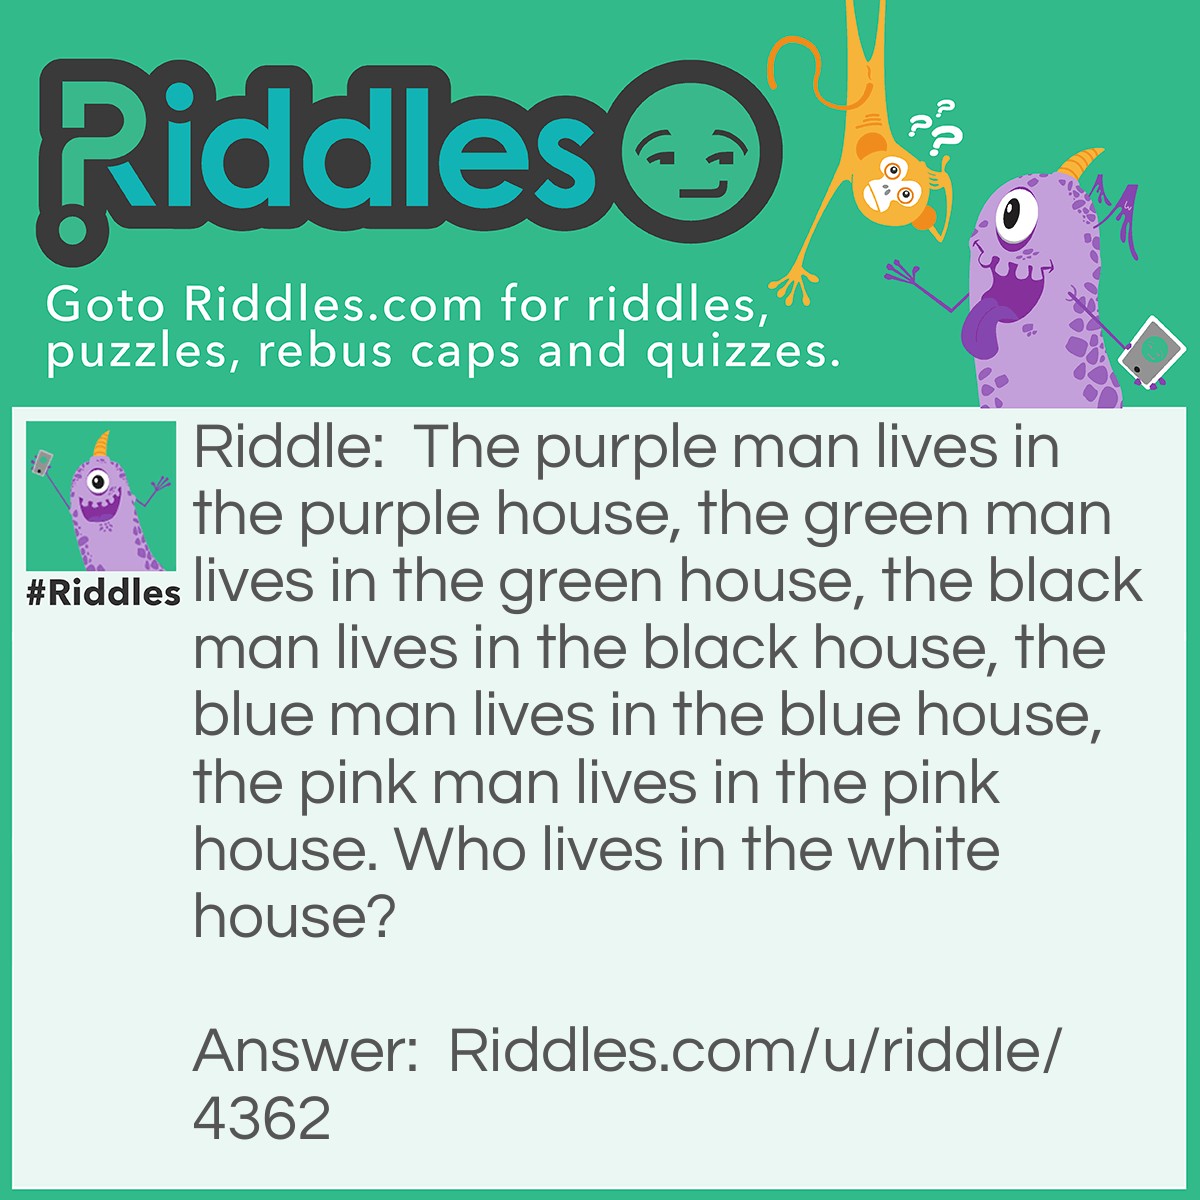 Riddle: The purple man lives in the purple house, the green man lives in the green house, the black man lives in the black house, the blue man lives in the blue house, the pink man lives in the pink house. Who lives in the white house? Answer: The president.